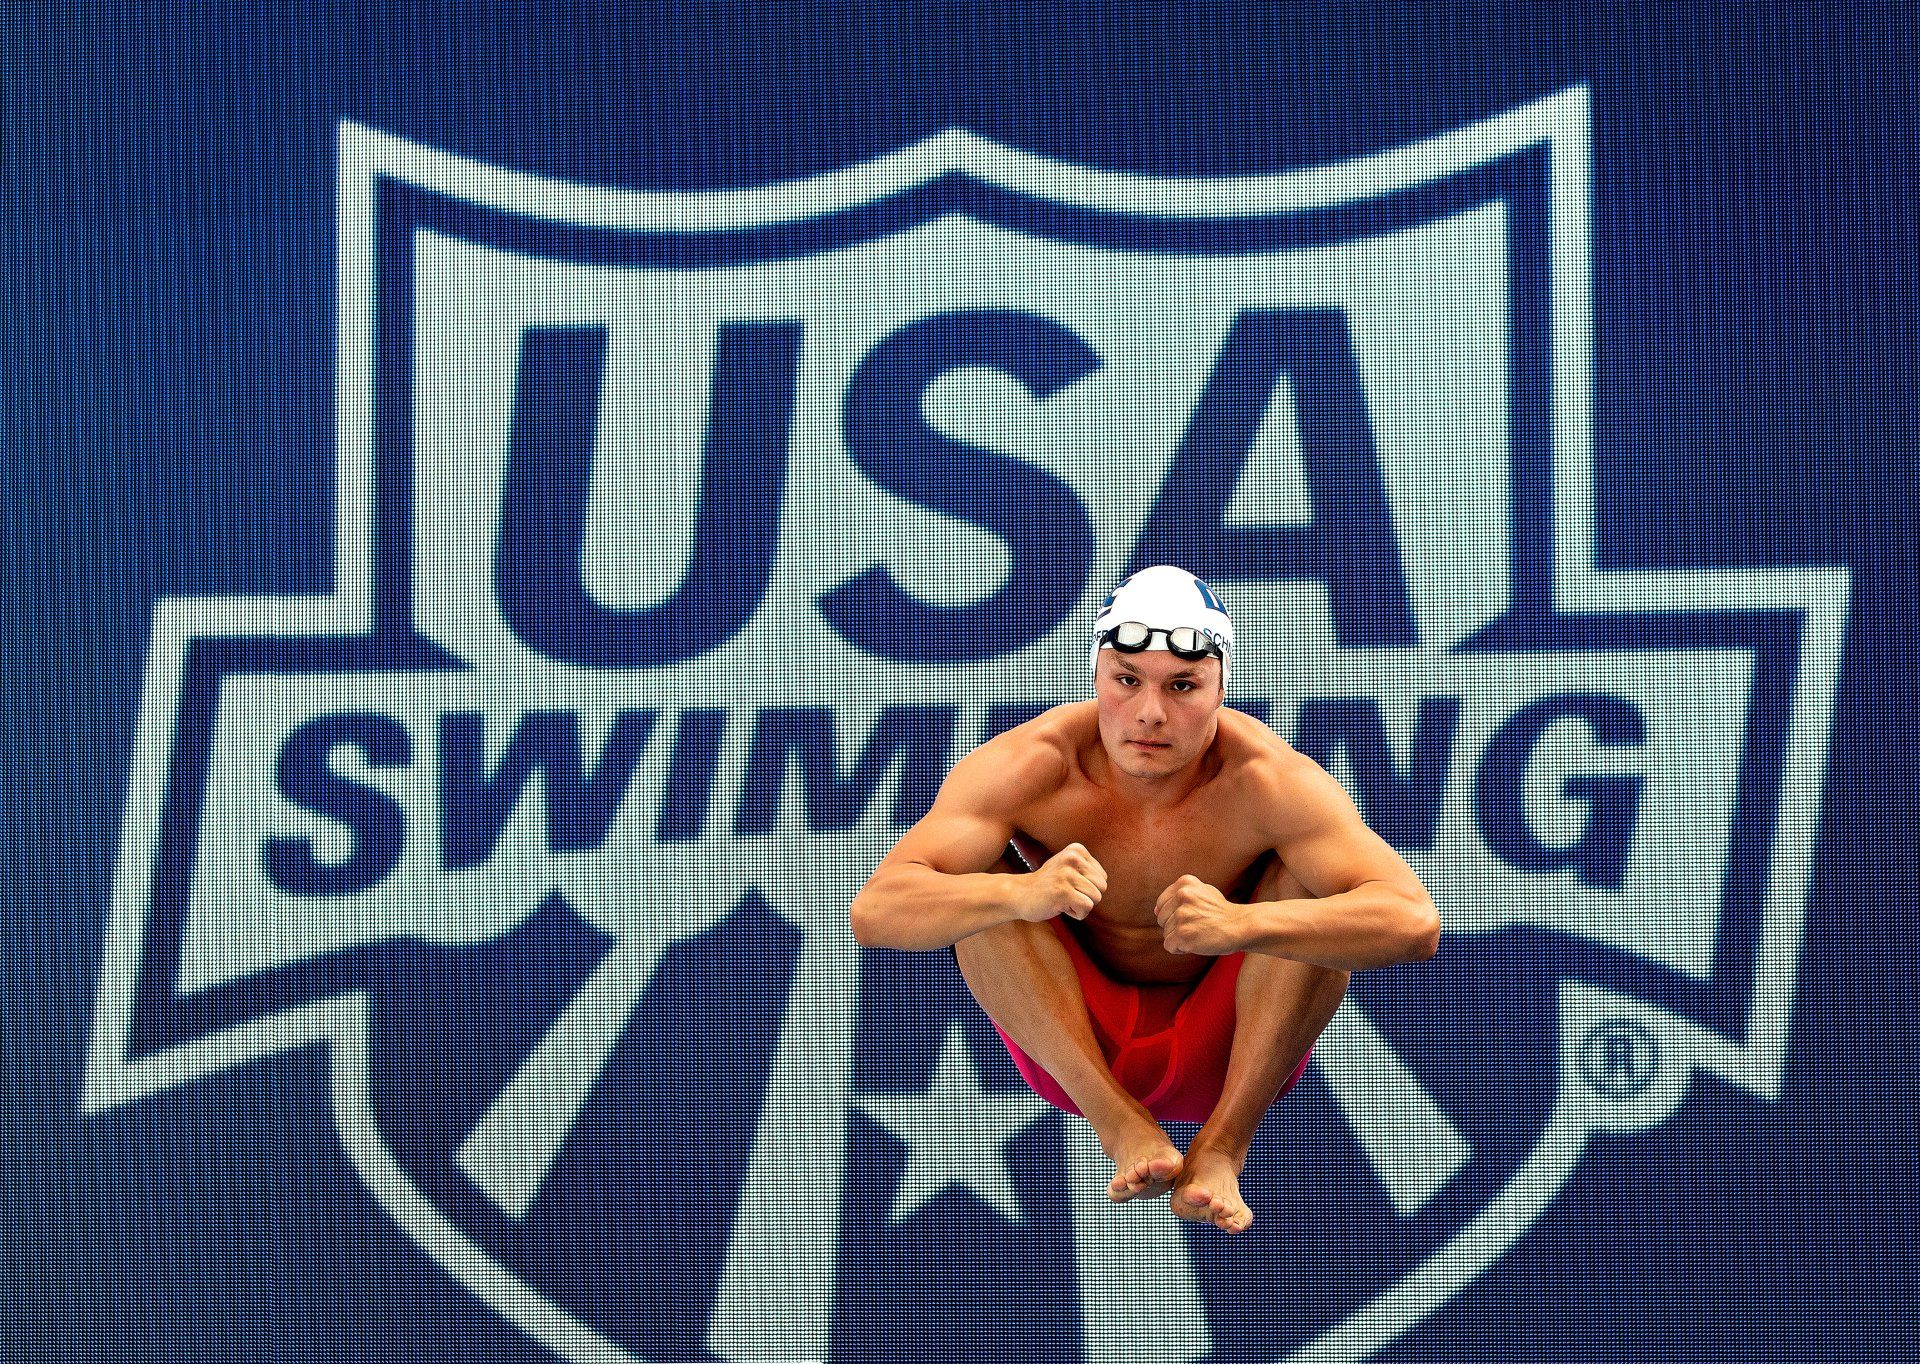 a diver flips at the USA Swimming Jr. Nationals